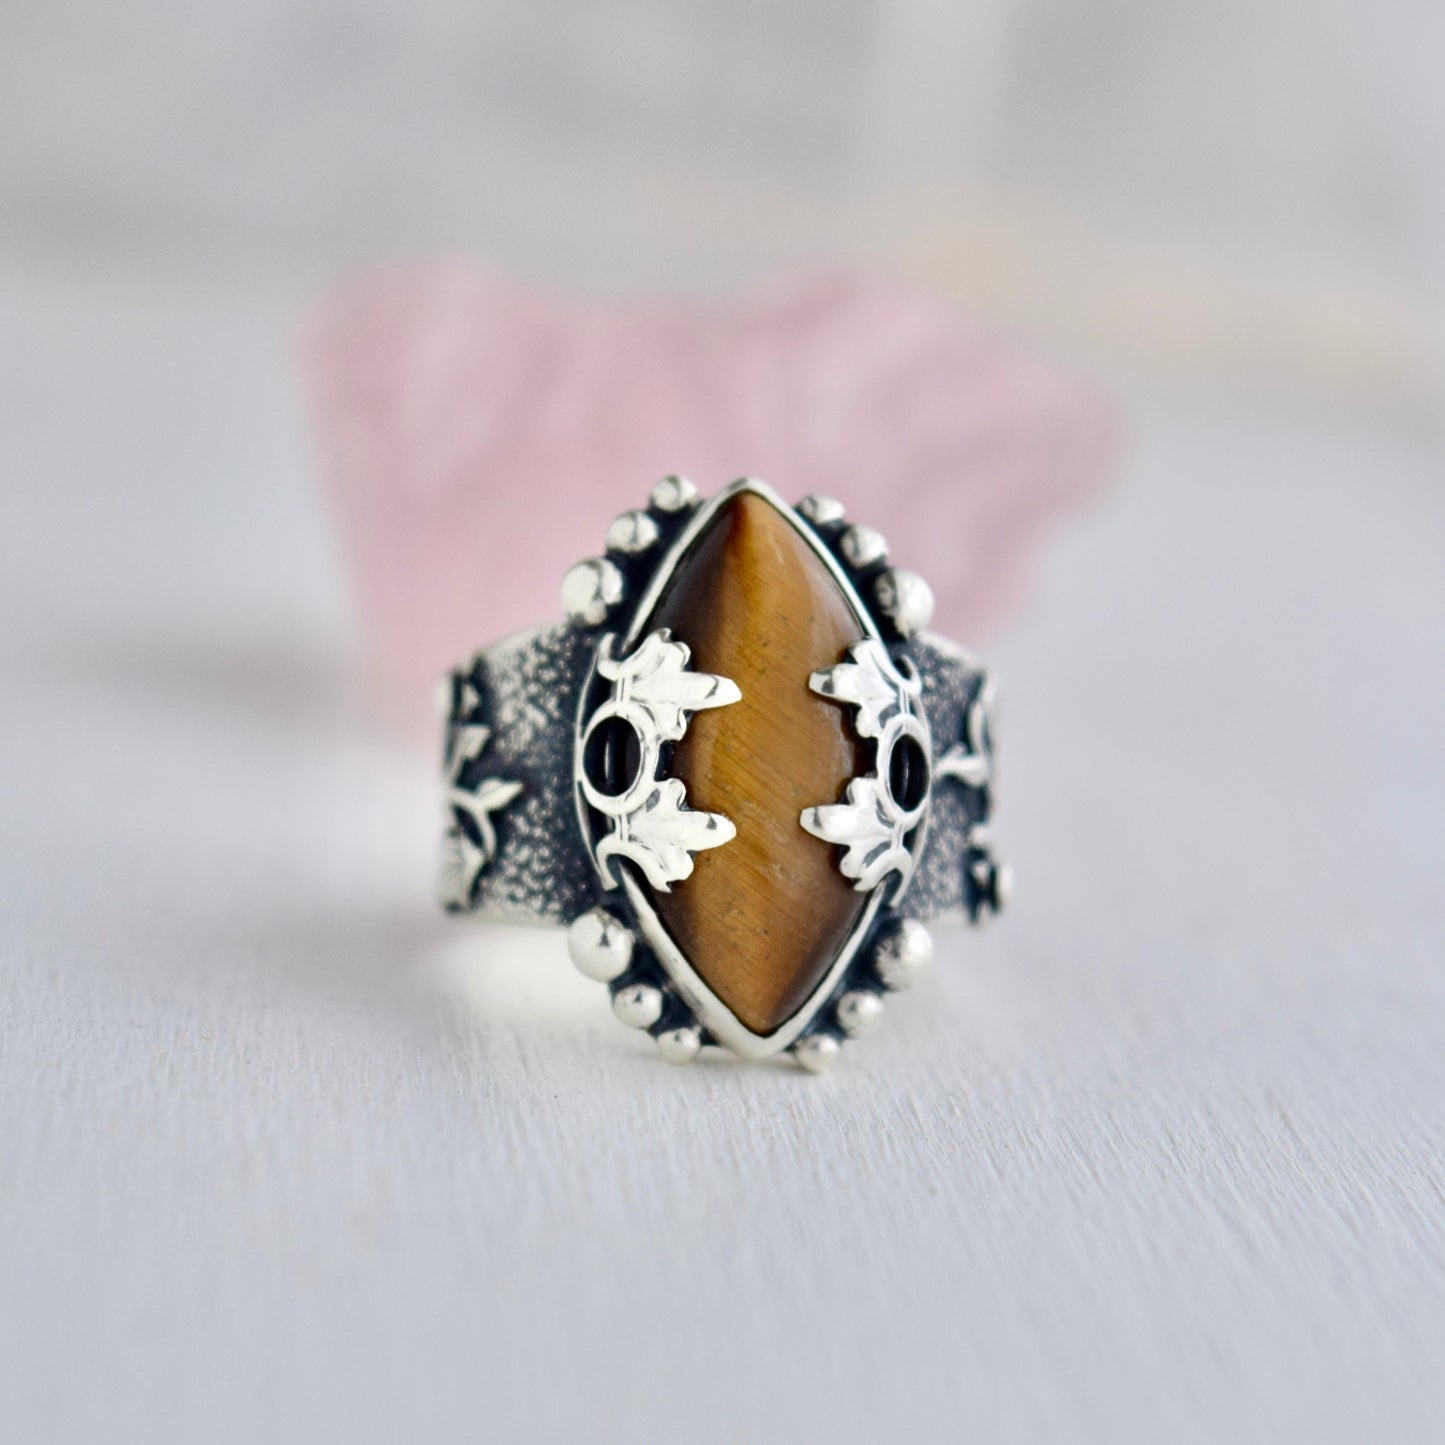 Tigers Eye Statement Ring with Gold Fill size 7.25